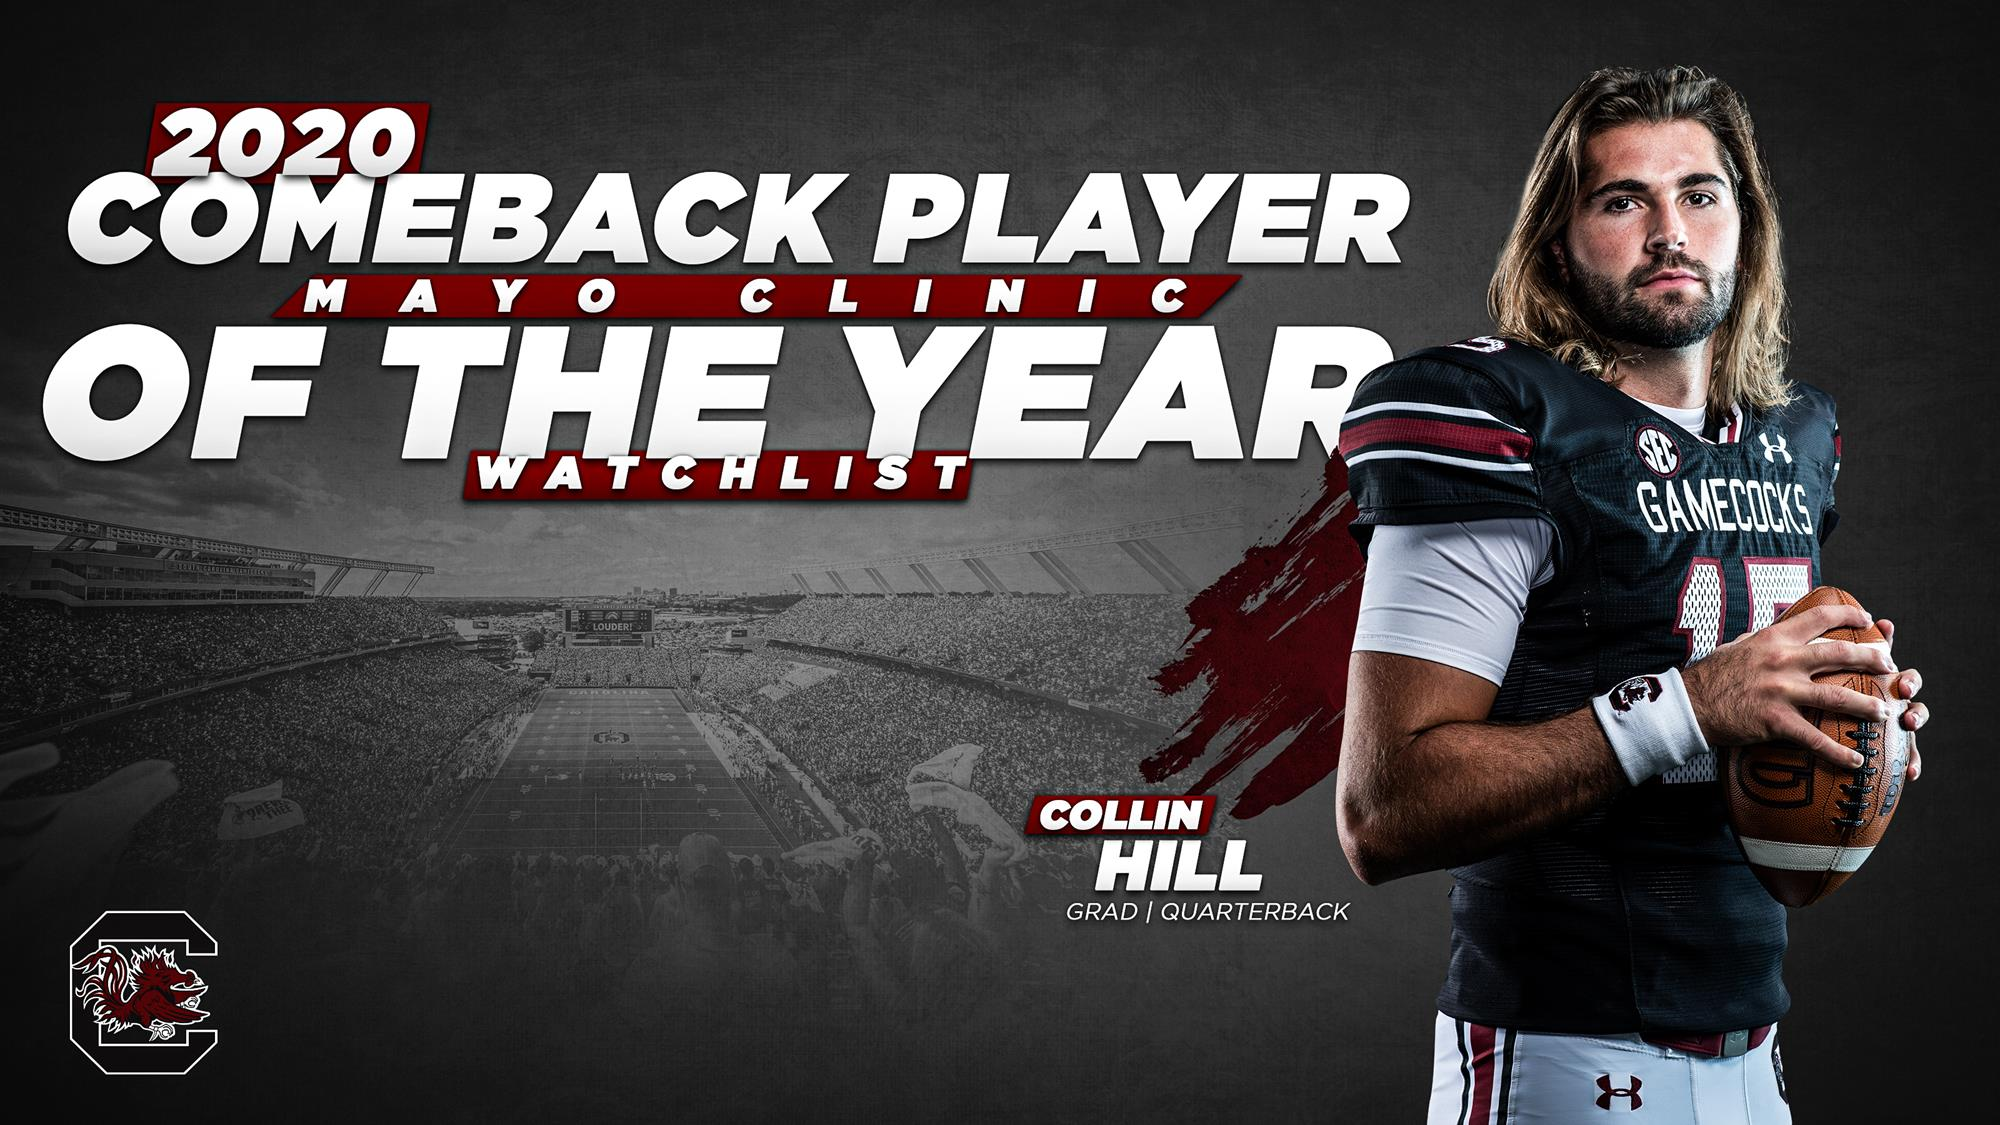 Collin Hill Nominated for 2020 Comeback Player of the Year Award